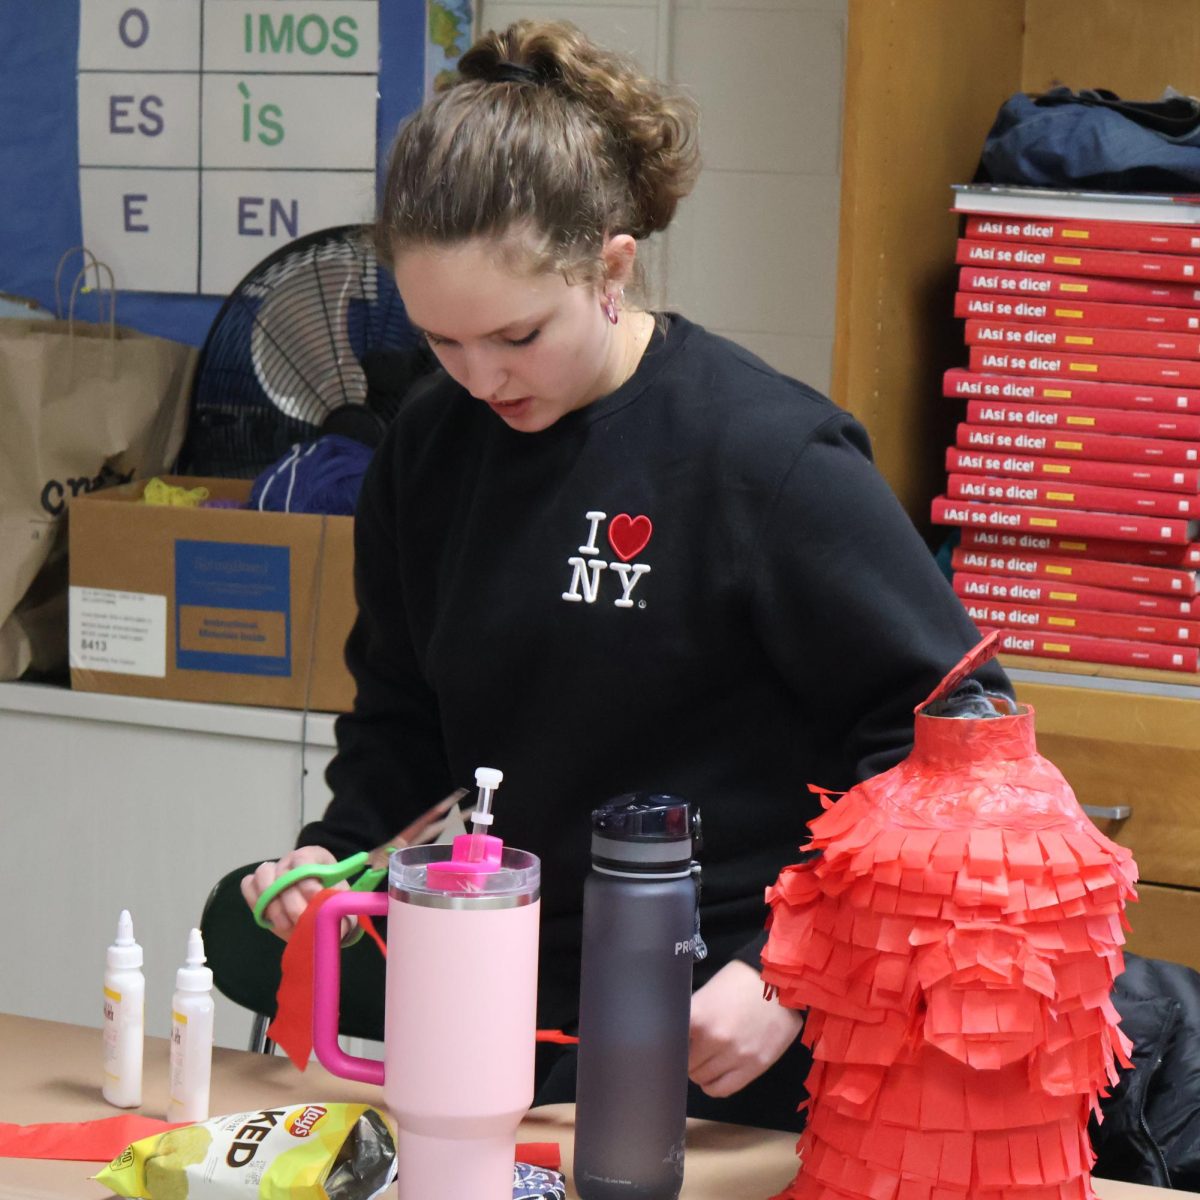 Cutting paper, sophomore Abigail Golen makes a pinata. On March 21, teacher Hillary Fischer had her students make pinatas in spanish class.